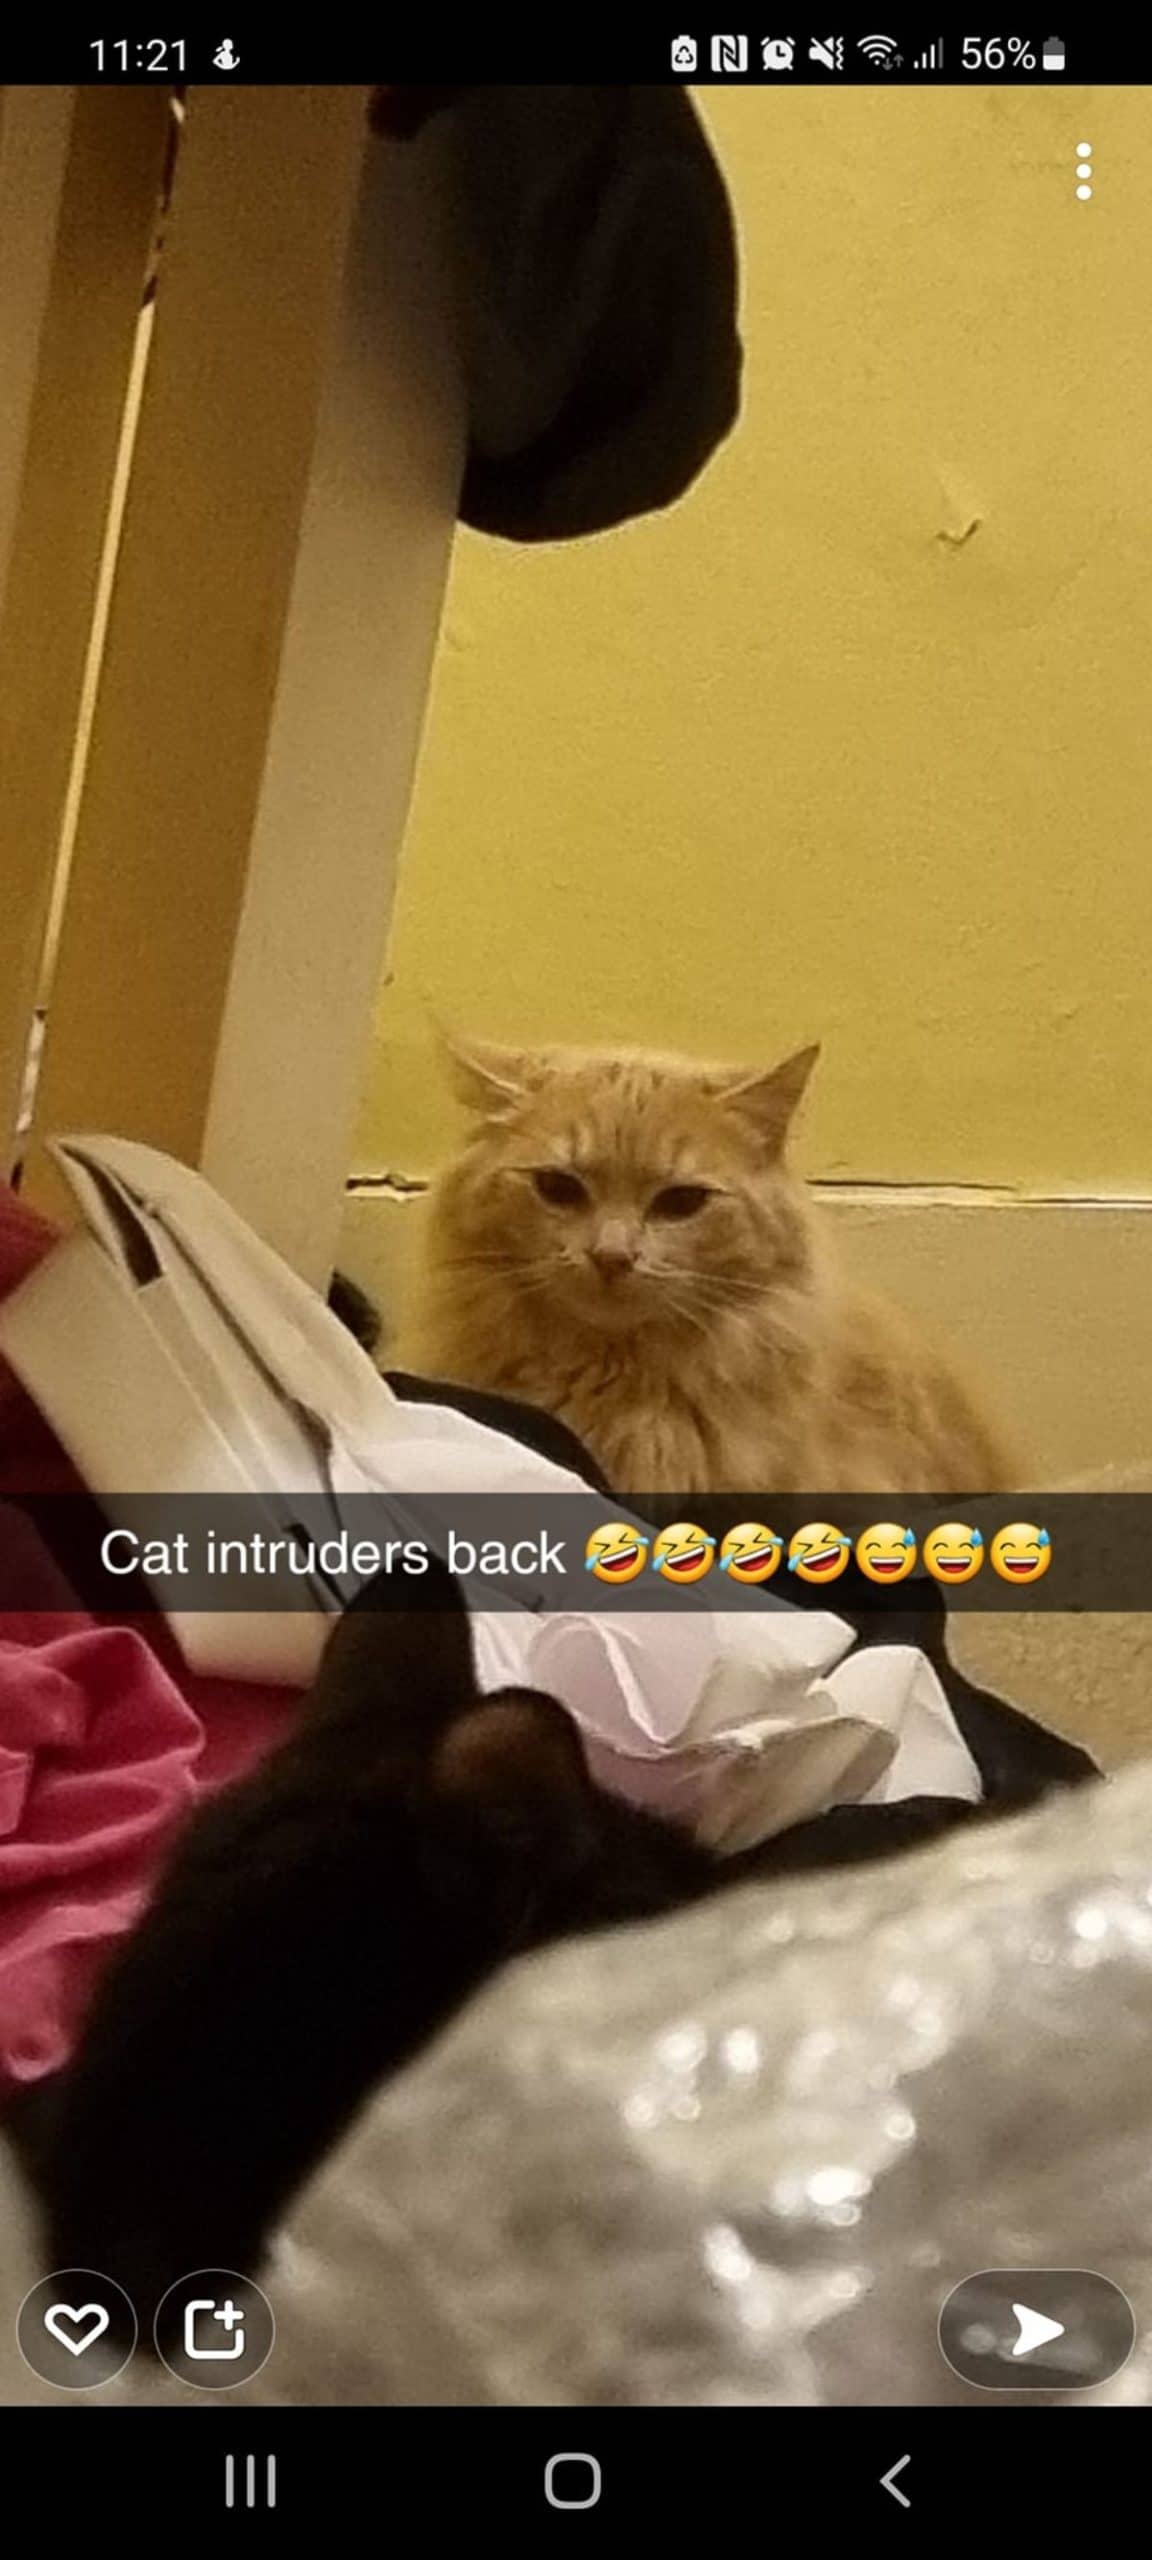 orange cat sitting behind a pile of things and a black cat with the caption cat intruders back